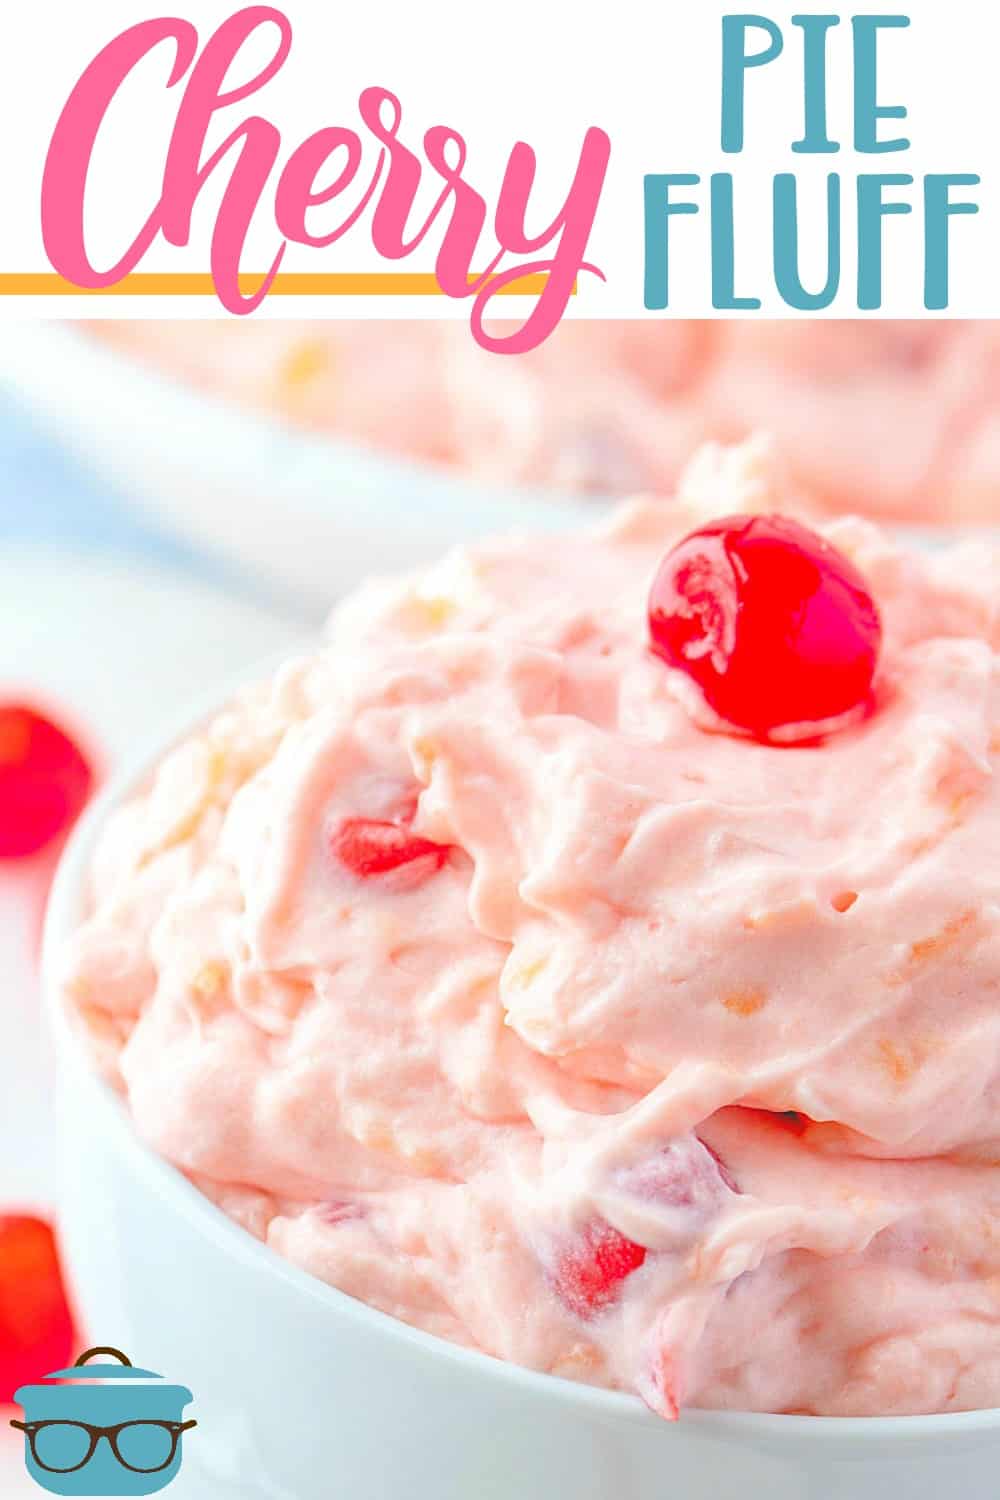 Cherry Pie Fluff is a no-bake dessert that is made with cheesecake pudding, cherry pie filling, whipped topping and pineapple a delicious summer treat!